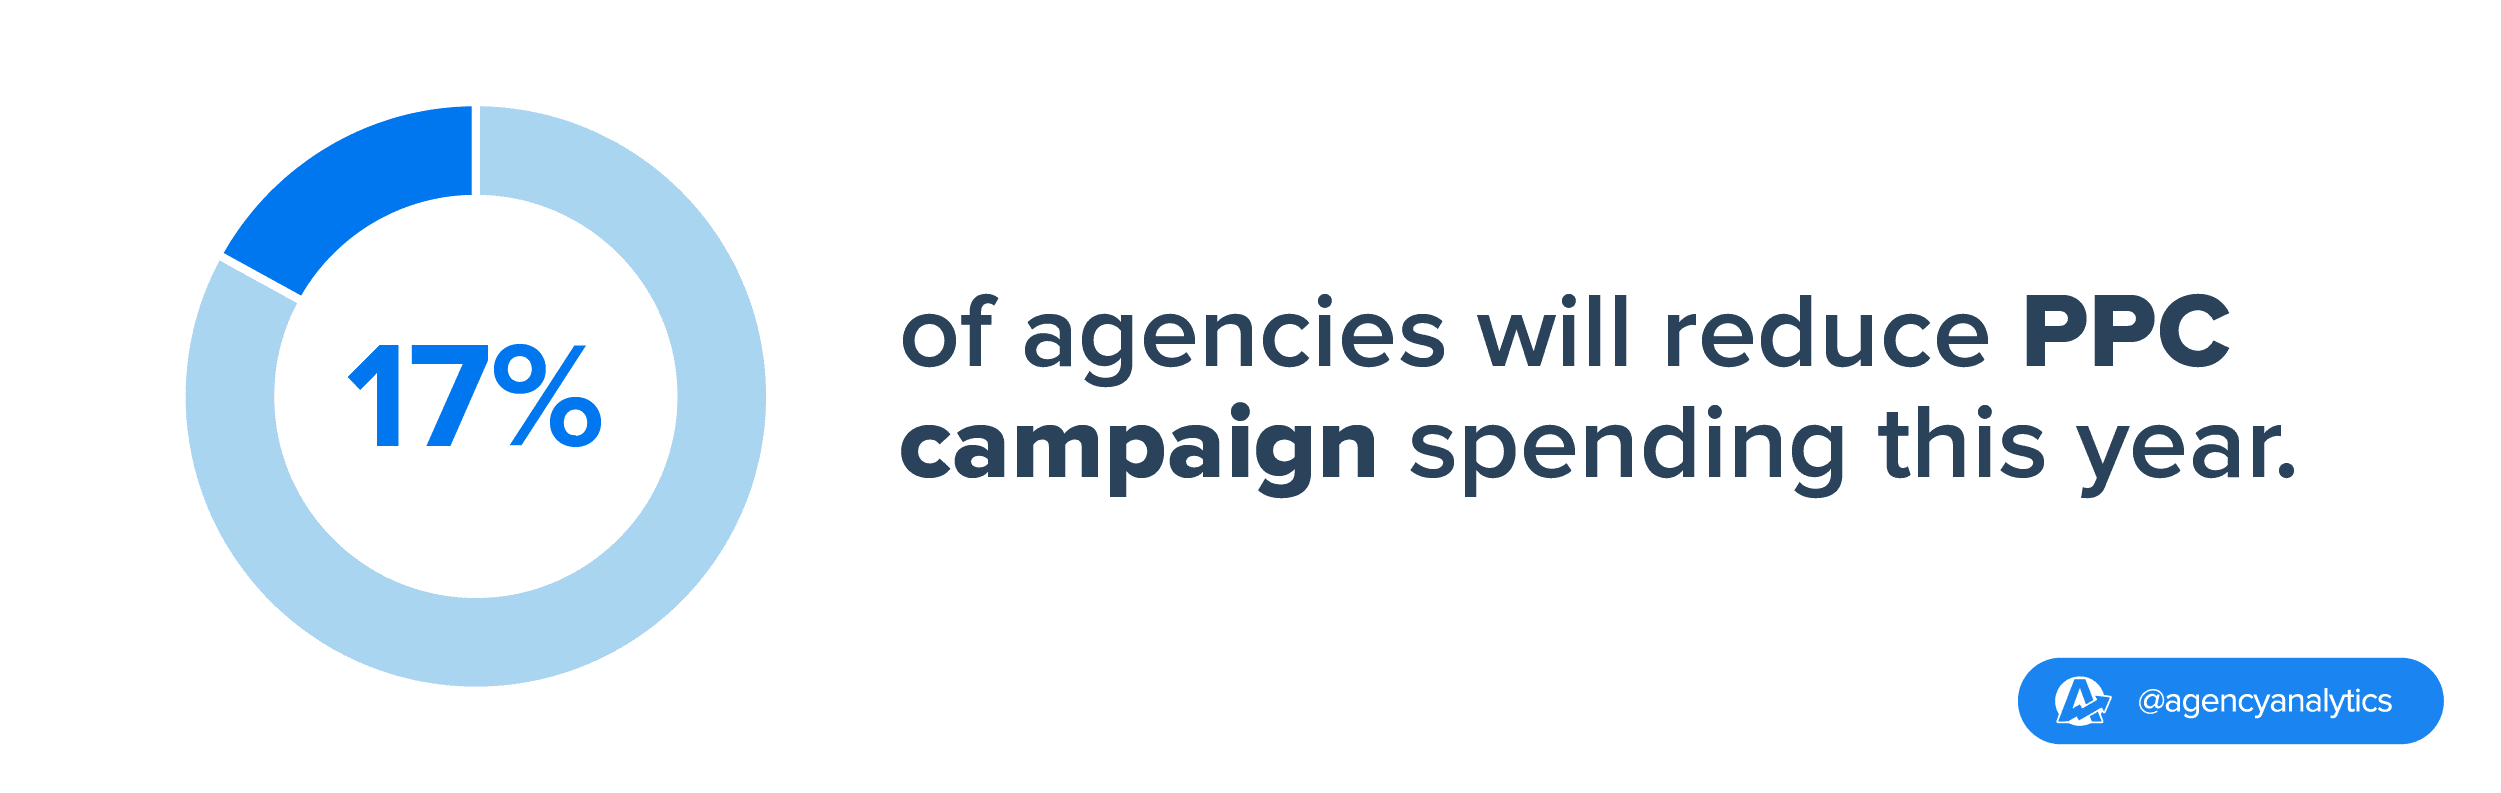 17% of agencies will reduce PPC campaign spending this year